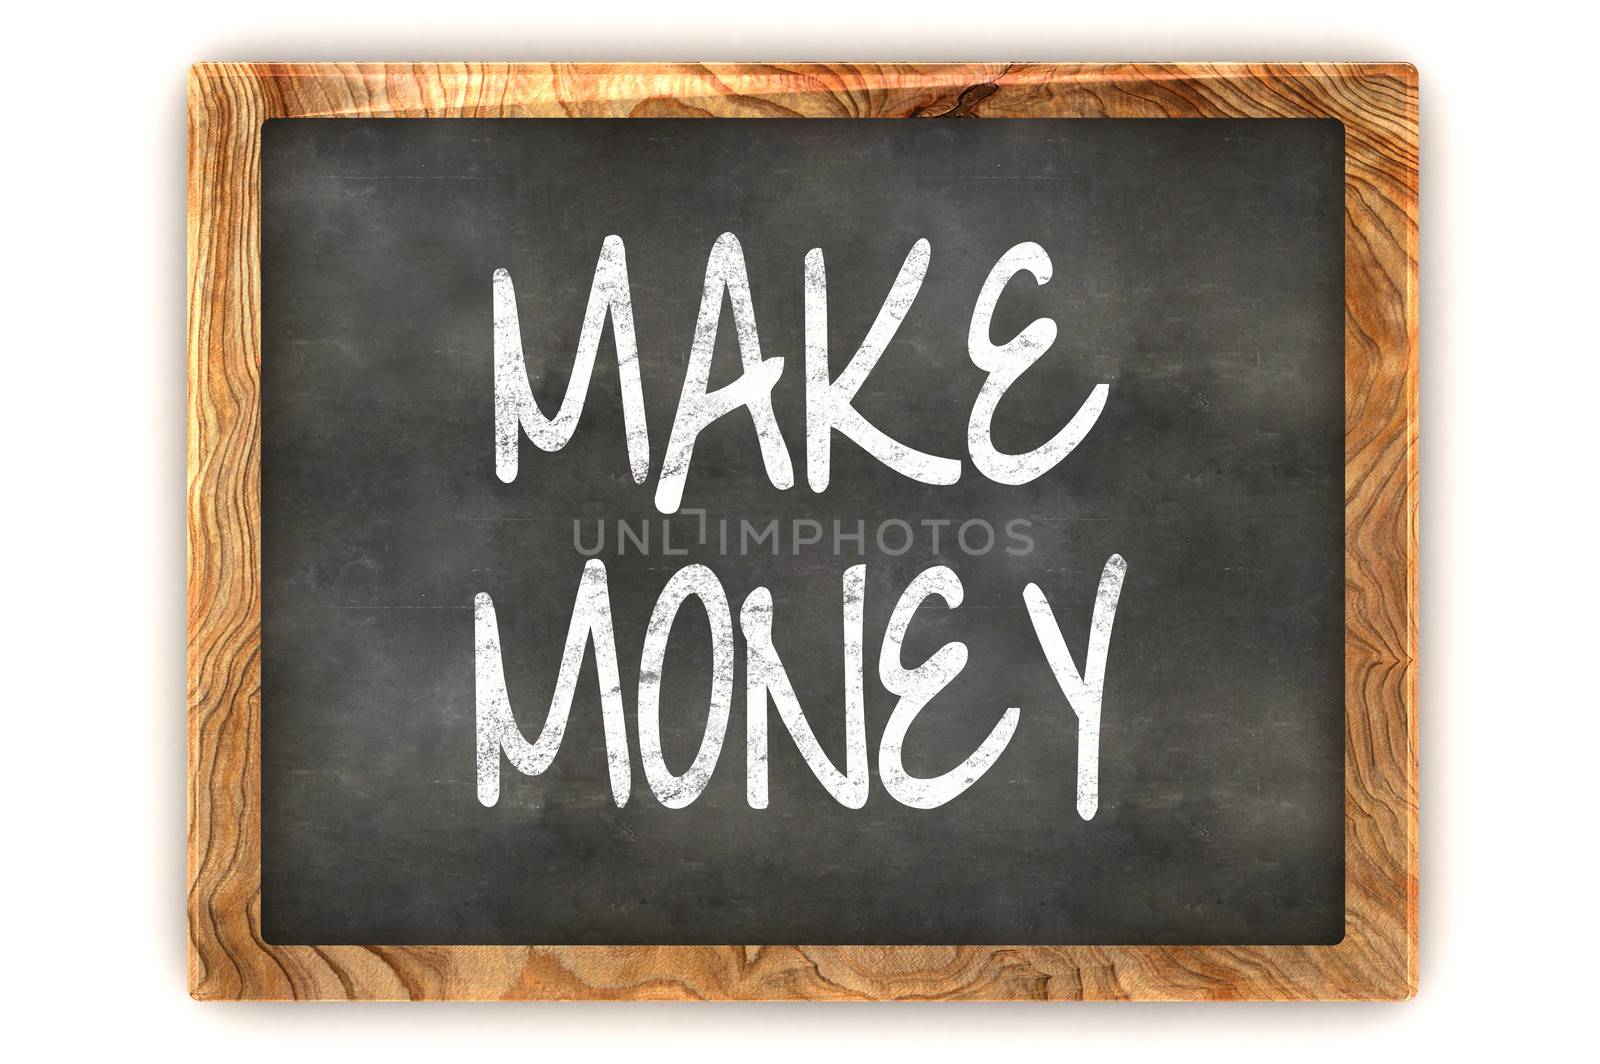 A Colourful 3d Rendered Blackboard Concept Illustration, showing the words "Make Money"